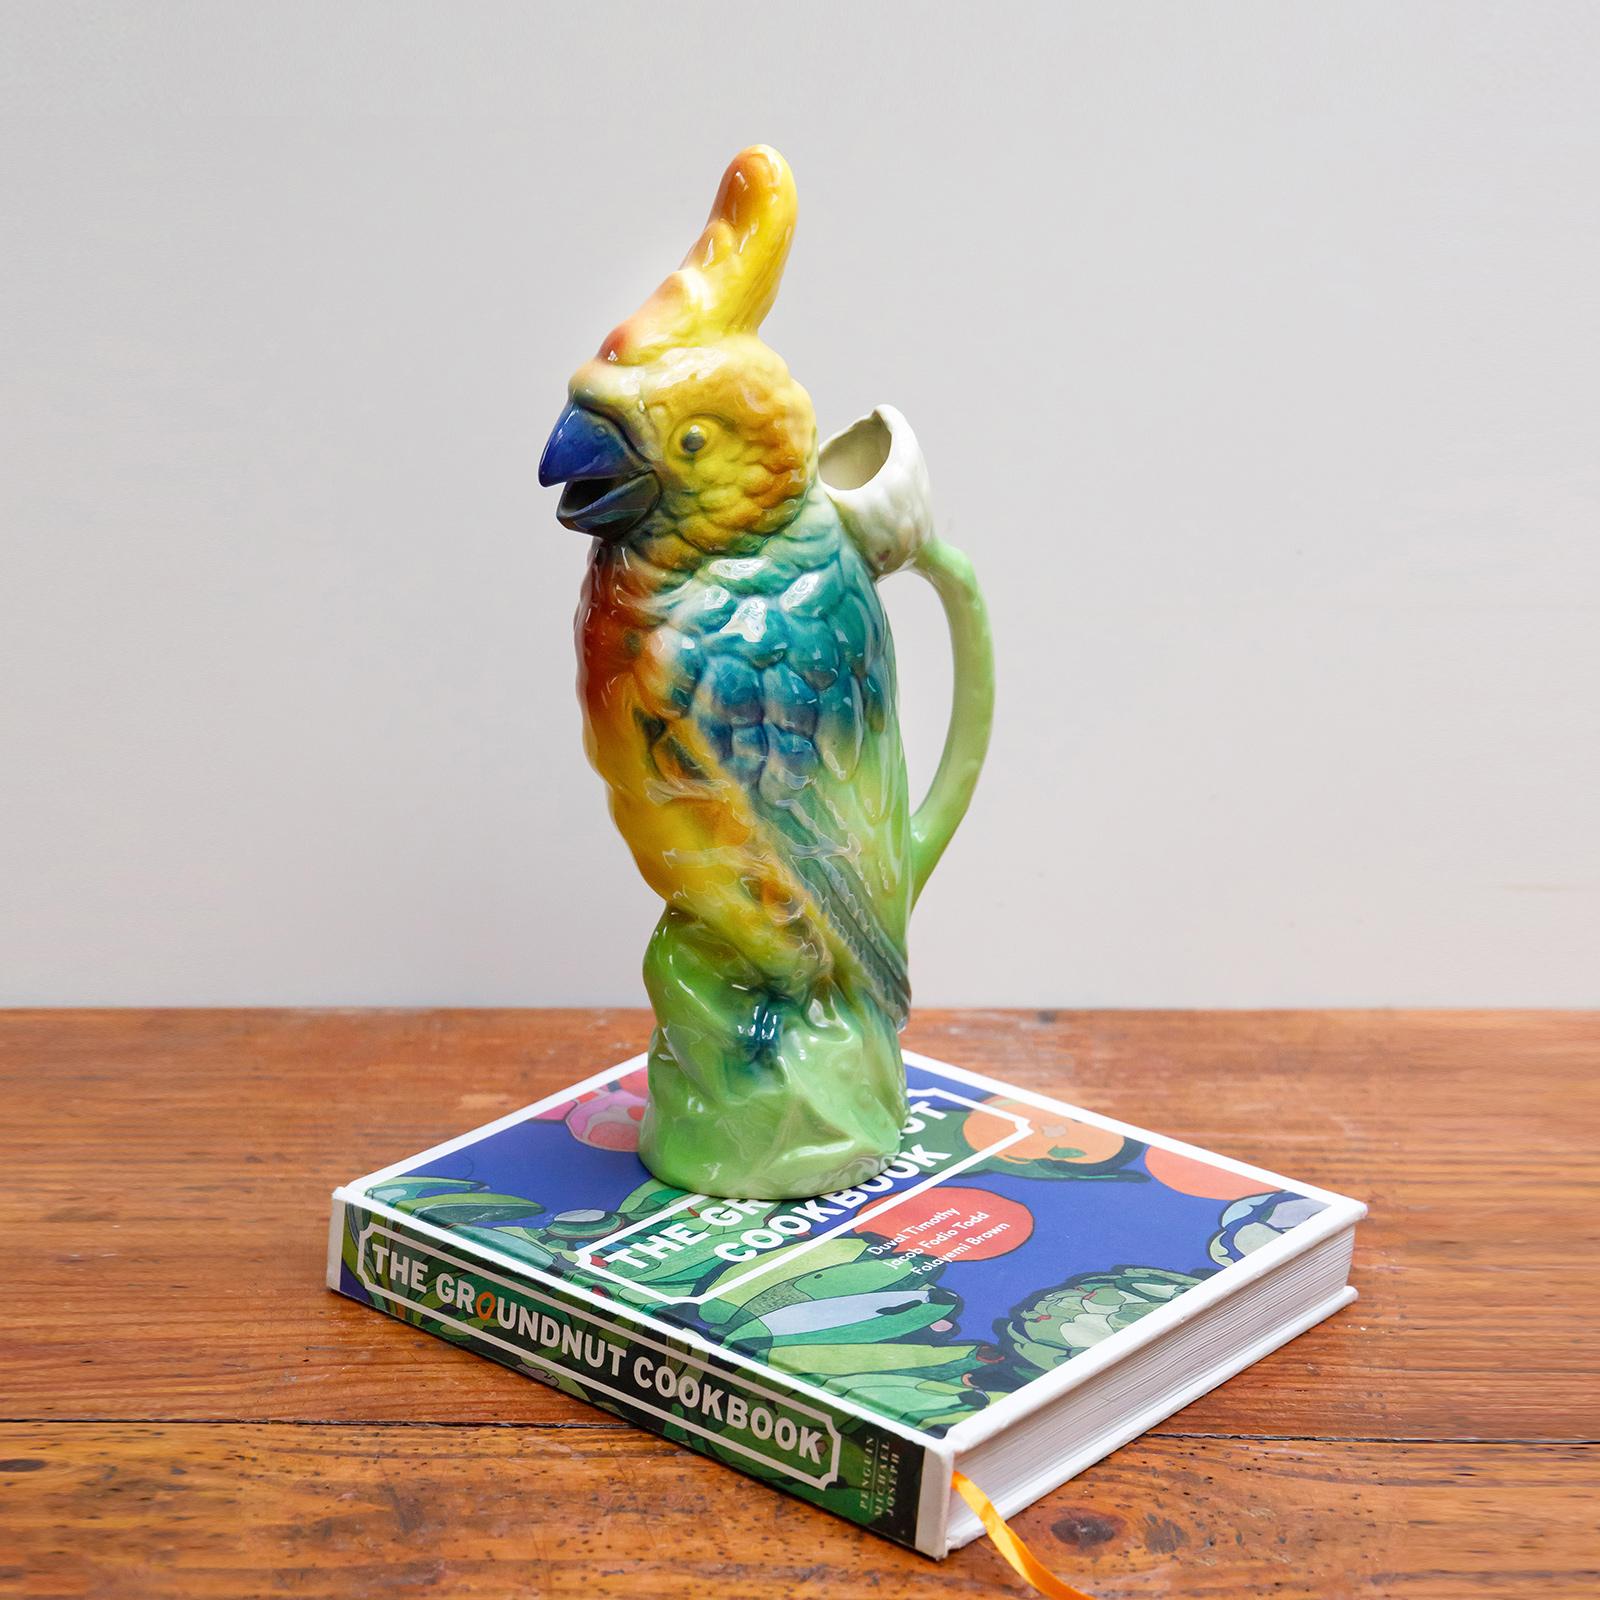 French majolica parrot absinthe or water pitcher by St. Clément.

In good condition, the pitcher showcases a vibrant coloration and glaze, making it an excellent decorative piece for any table setting.

St. Clément Pottery boasts a rich history